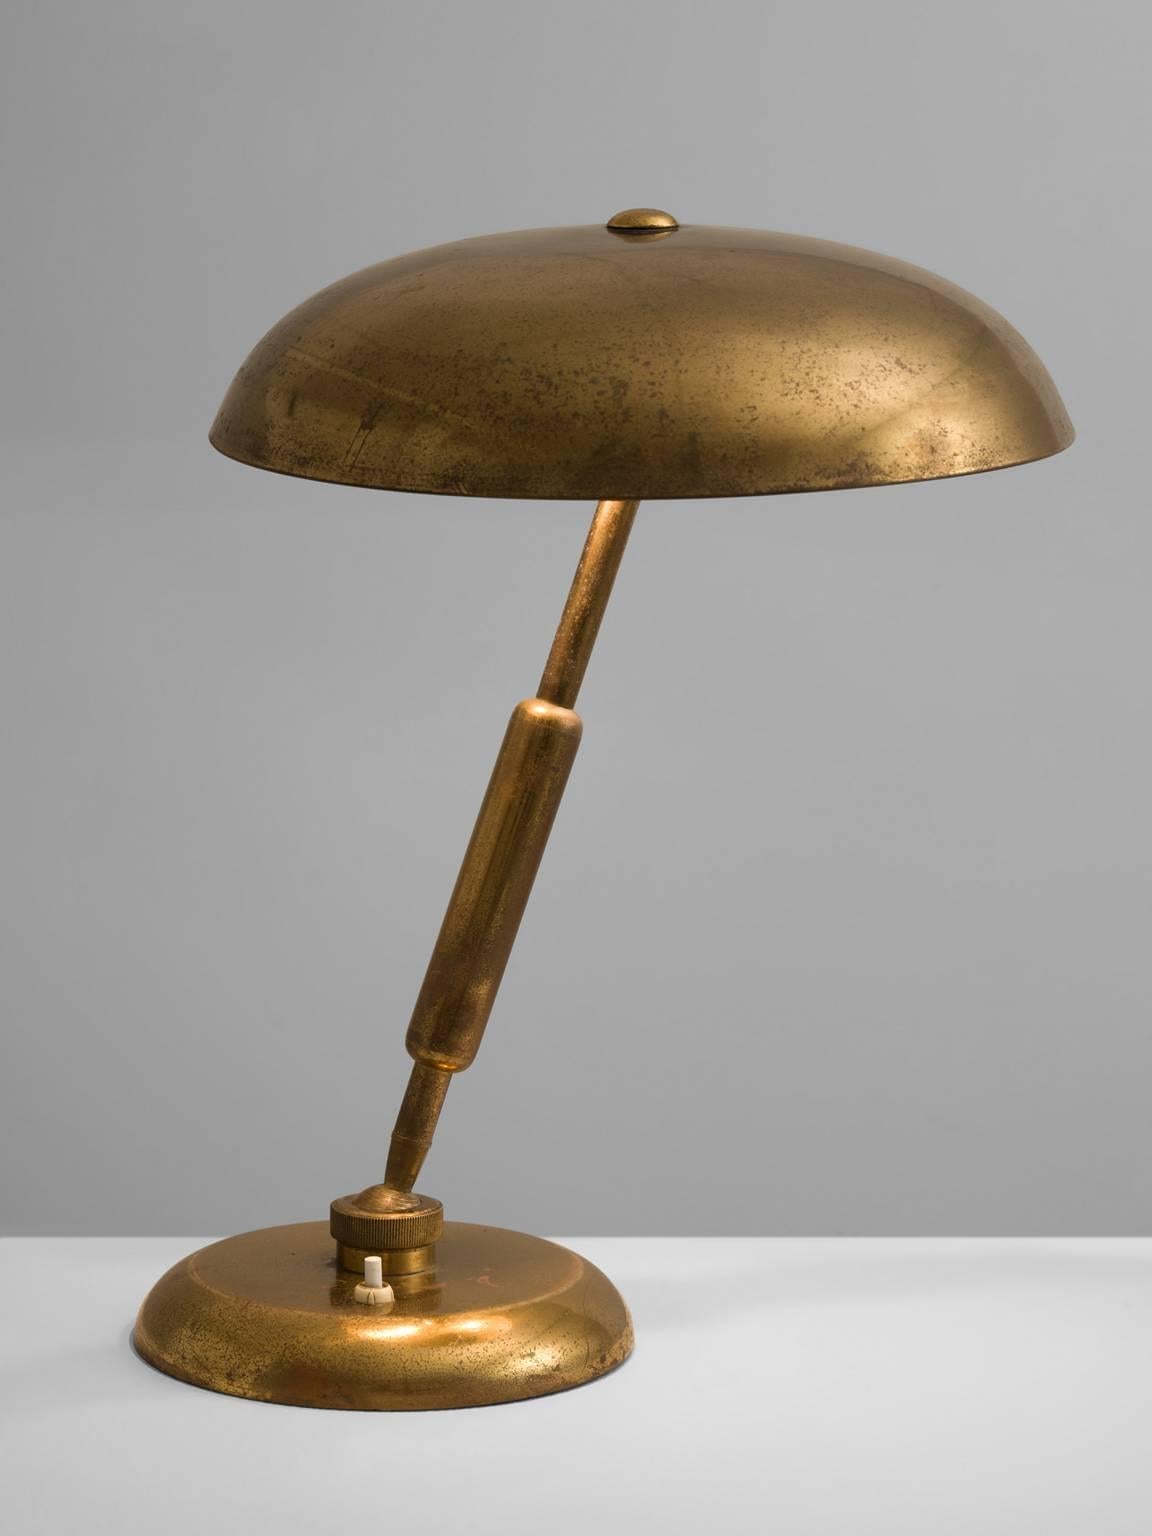 Table light, brass, Italy, 1940s.

This table light is archetypical for a Classic desk light. A round shade is combined with an adjustable brass stalk. This pre war lamp bears traits of the Art Deco and Art Nouveau and is features beautiful warm